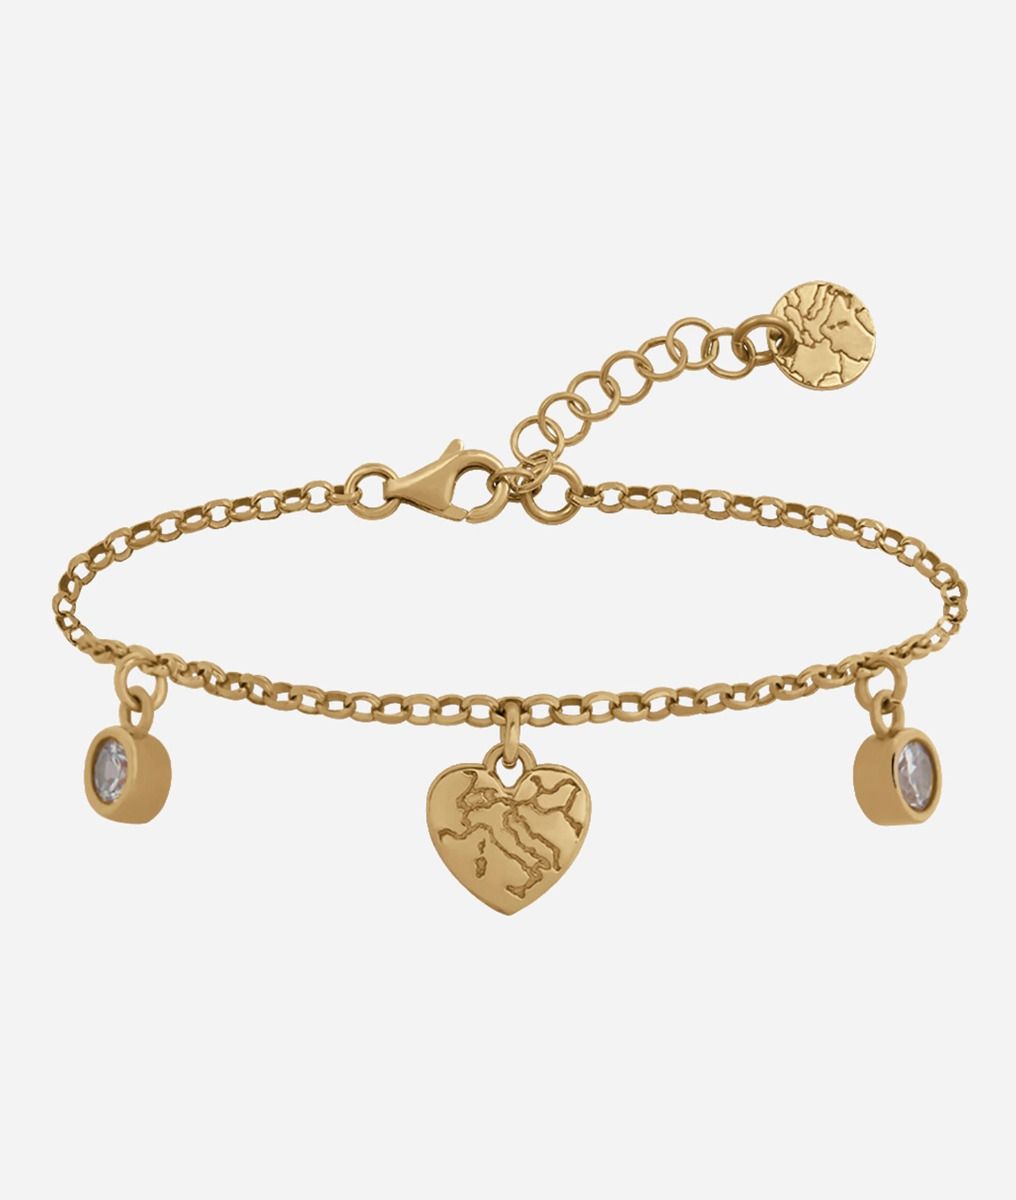 Rambla bracelet with three charms dipped in Yellow Gold,front